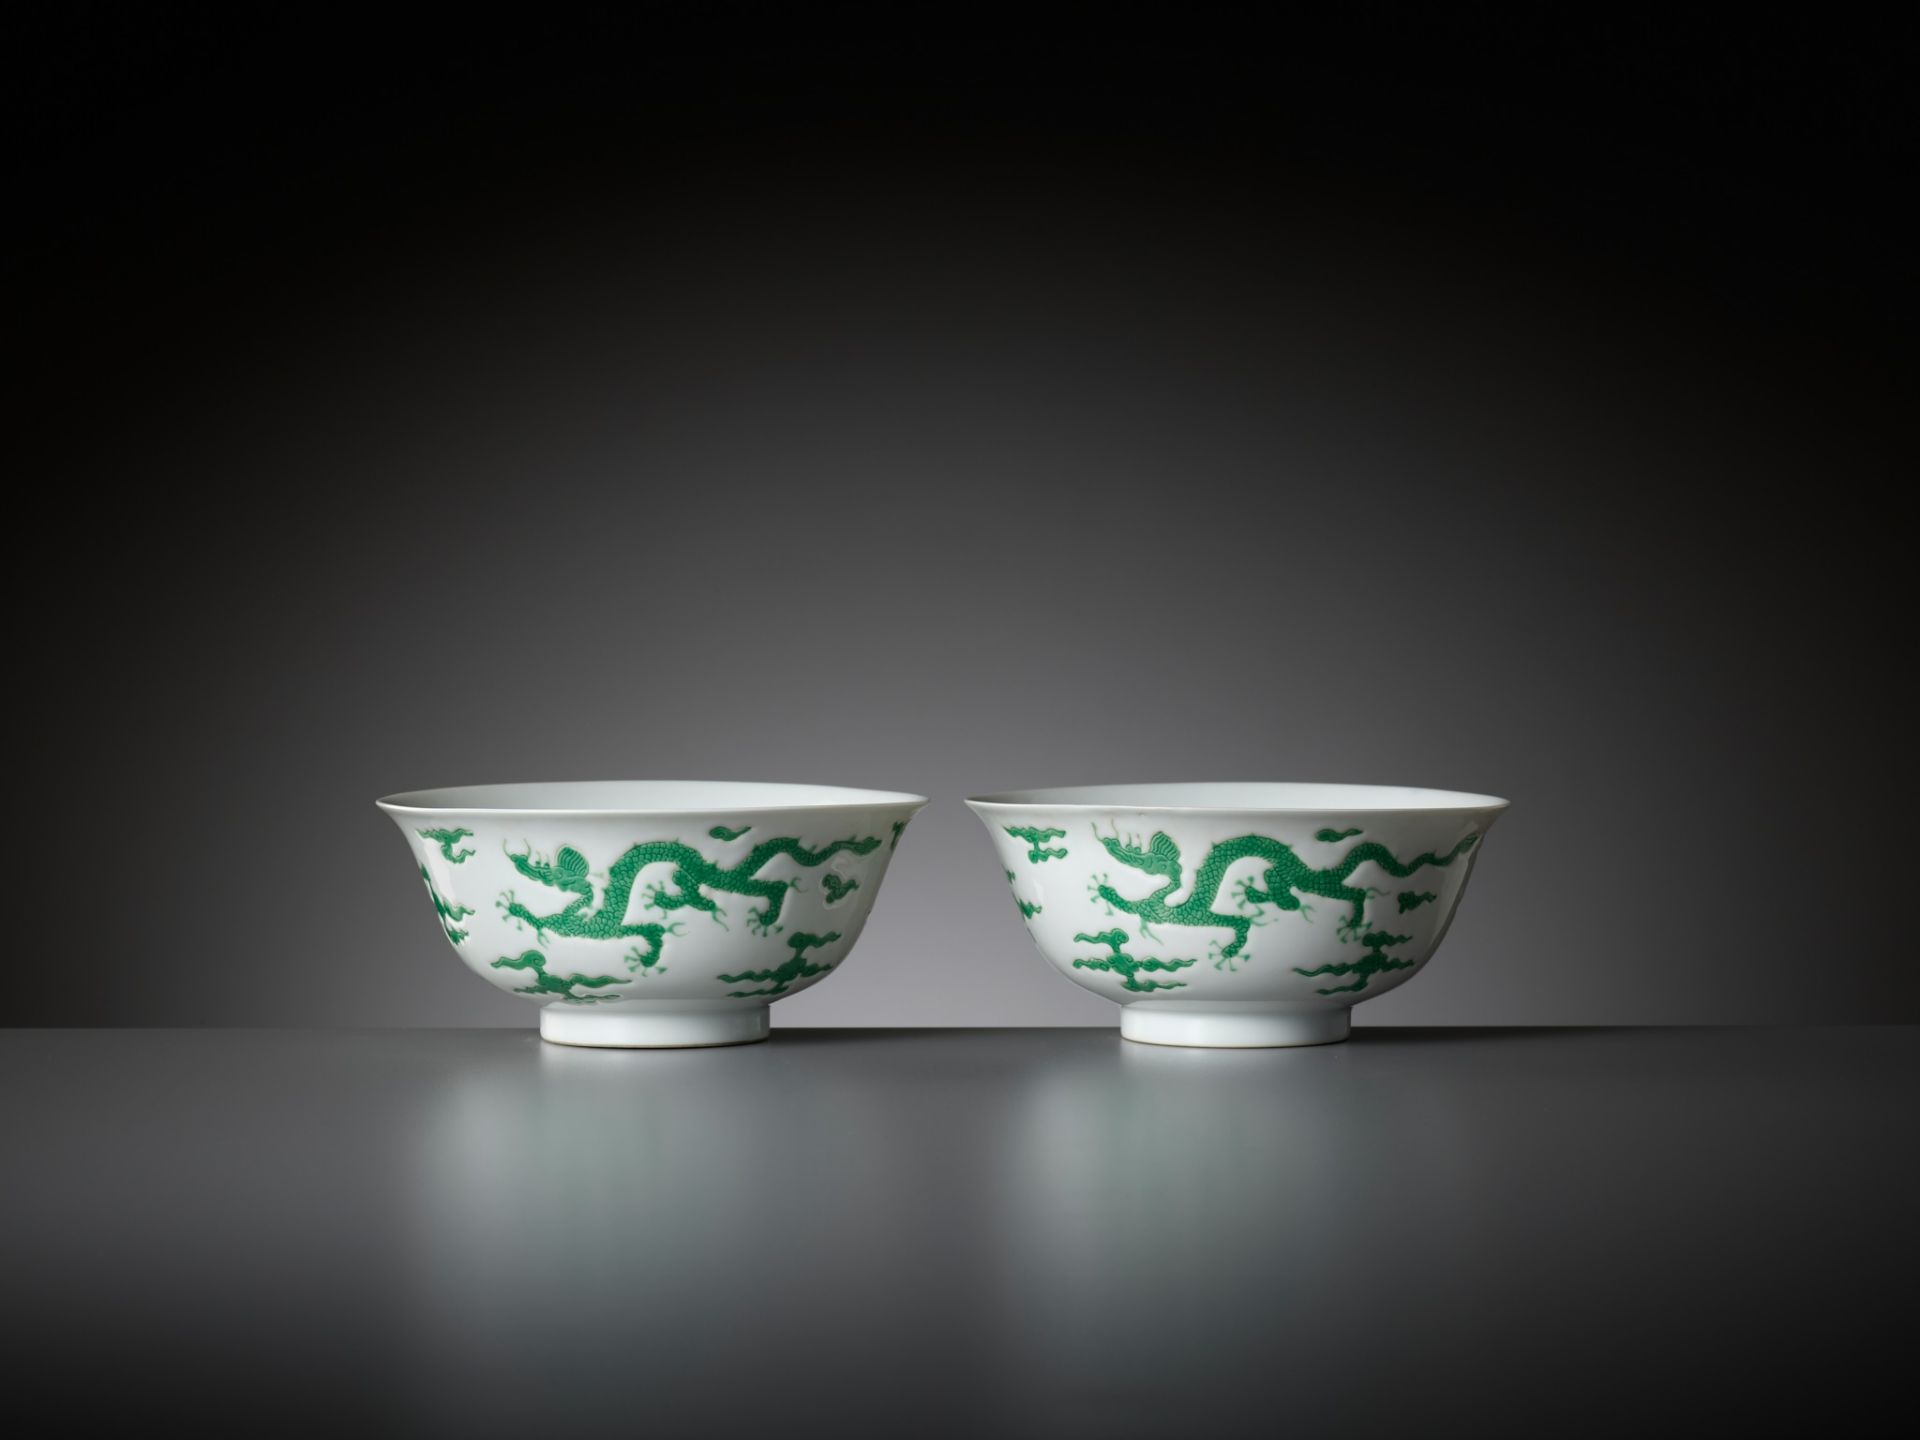 A RARE PAIR OF MING-STYLE GREEN-ENAMELED 'DRAGON' BOWLS, KANGXI PERIOD - Image 12 of 18